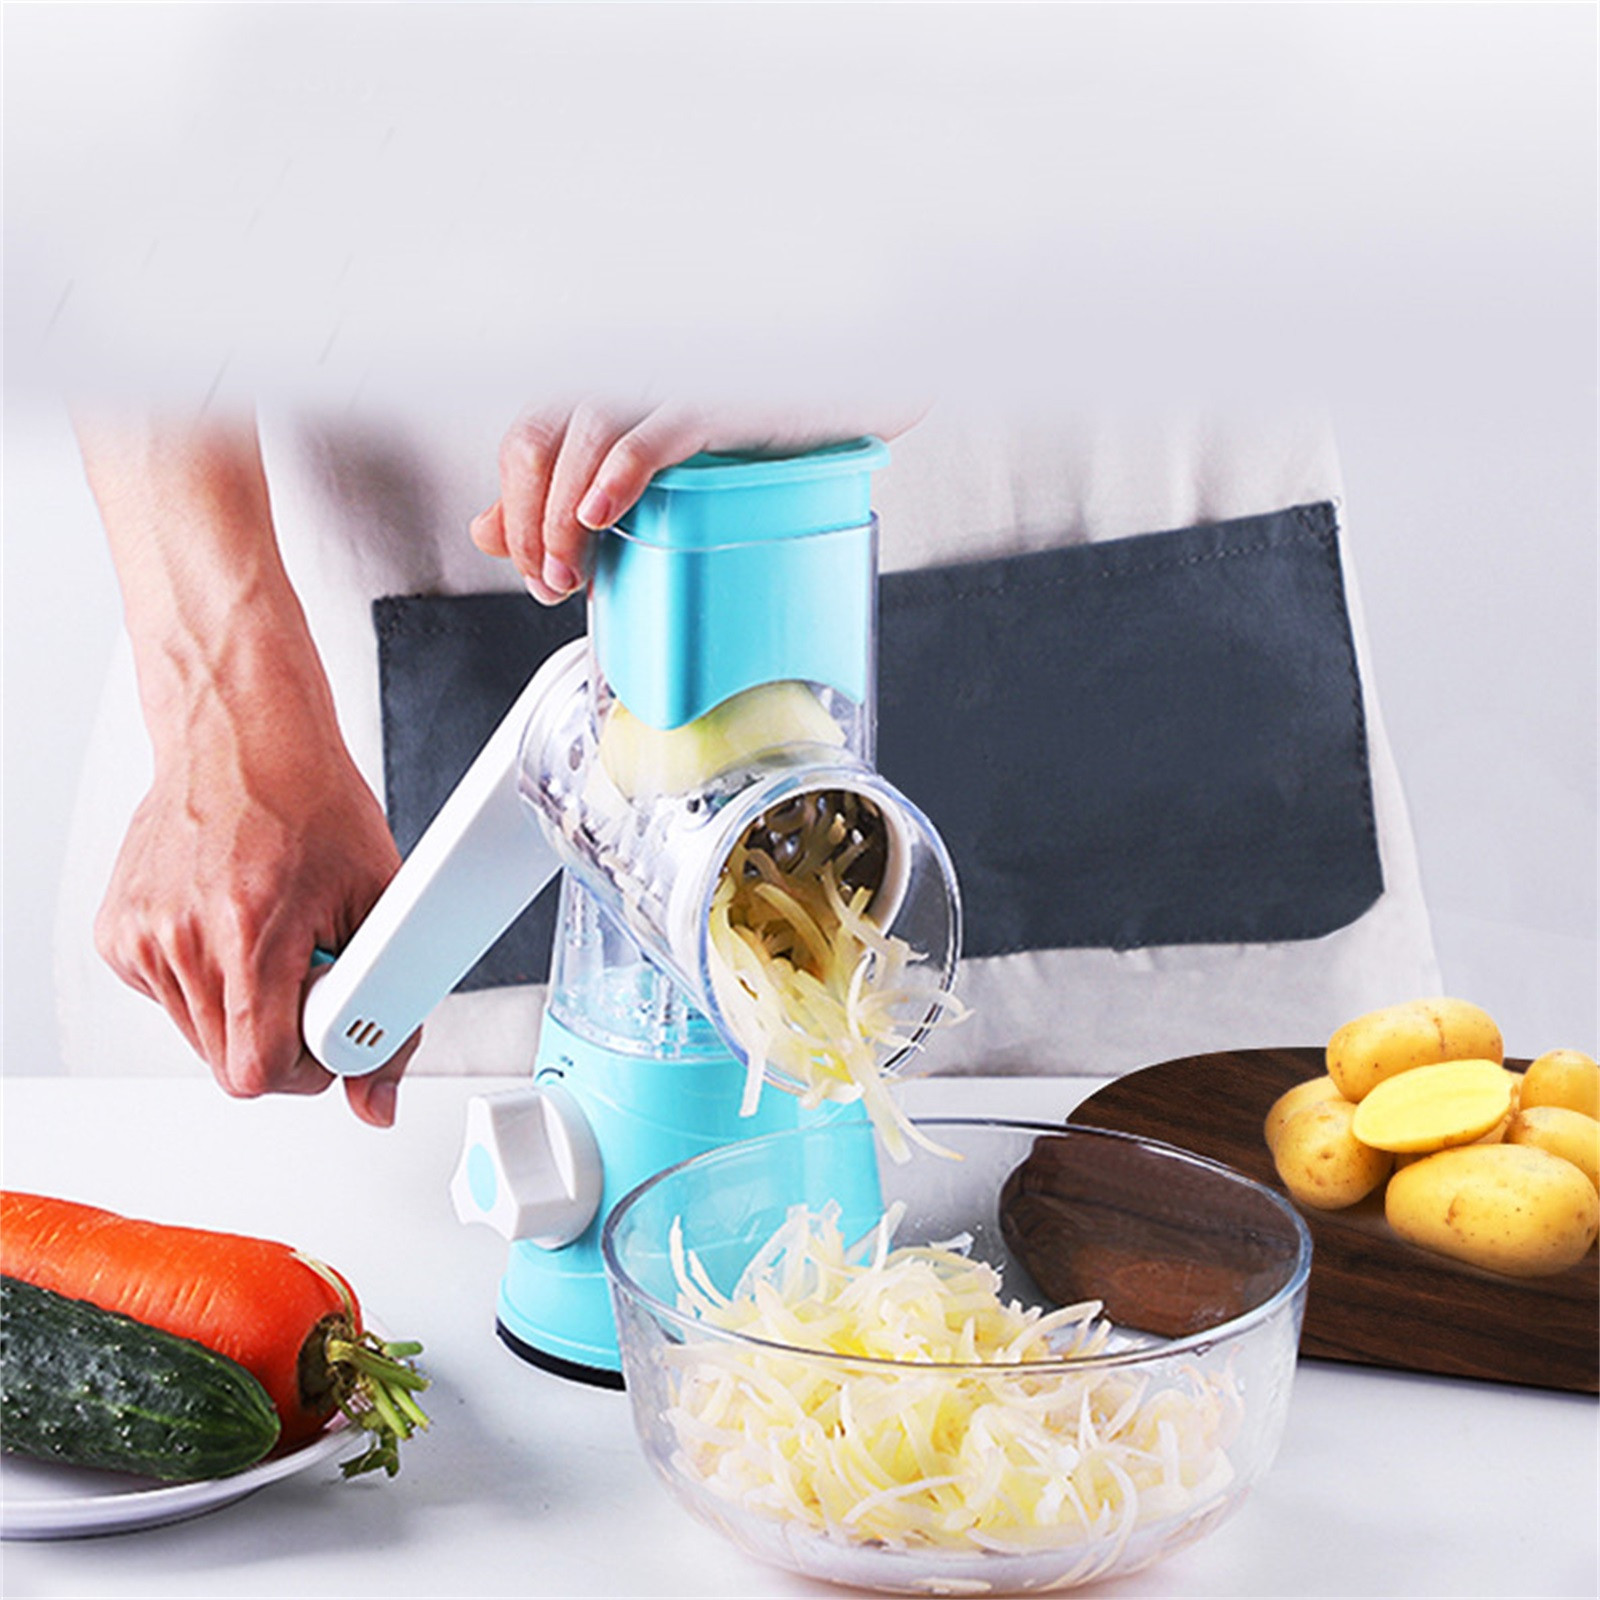 Dezsed In Multifunctional Vegetable Cutter  Slicers Hand Roller Type  Drum Vegetable Cutter With Blades Removable Easy To Clean on Clearance  Blue